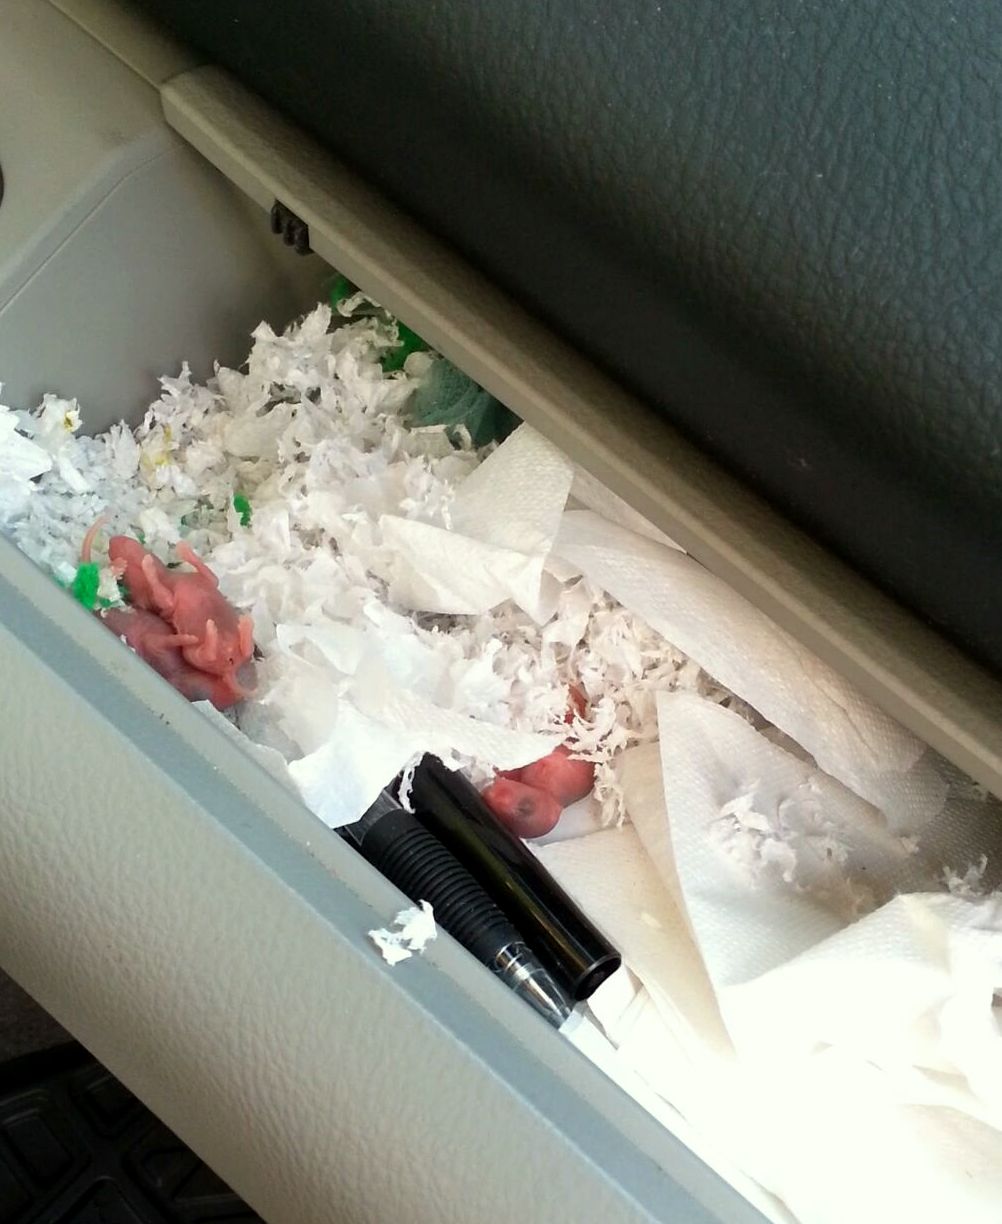 Rodentia in my upper glove box. Eucalyptus oil, peppermint oil and spearmint oil are supposed to deter these critters.